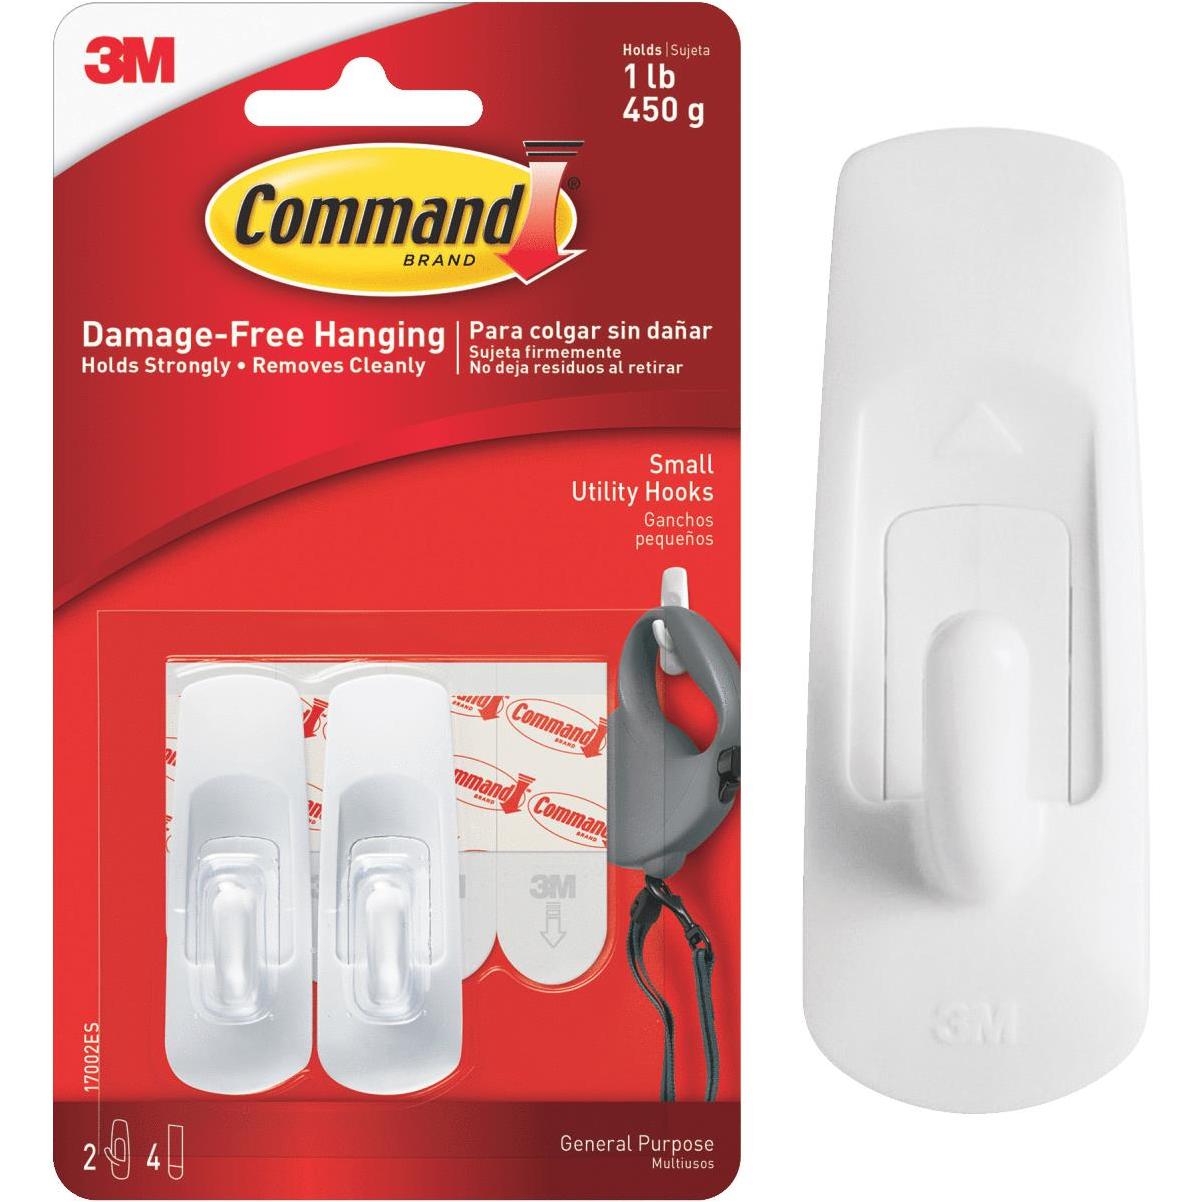 3M Command Adhesive Hook, Small, White - 2 pack